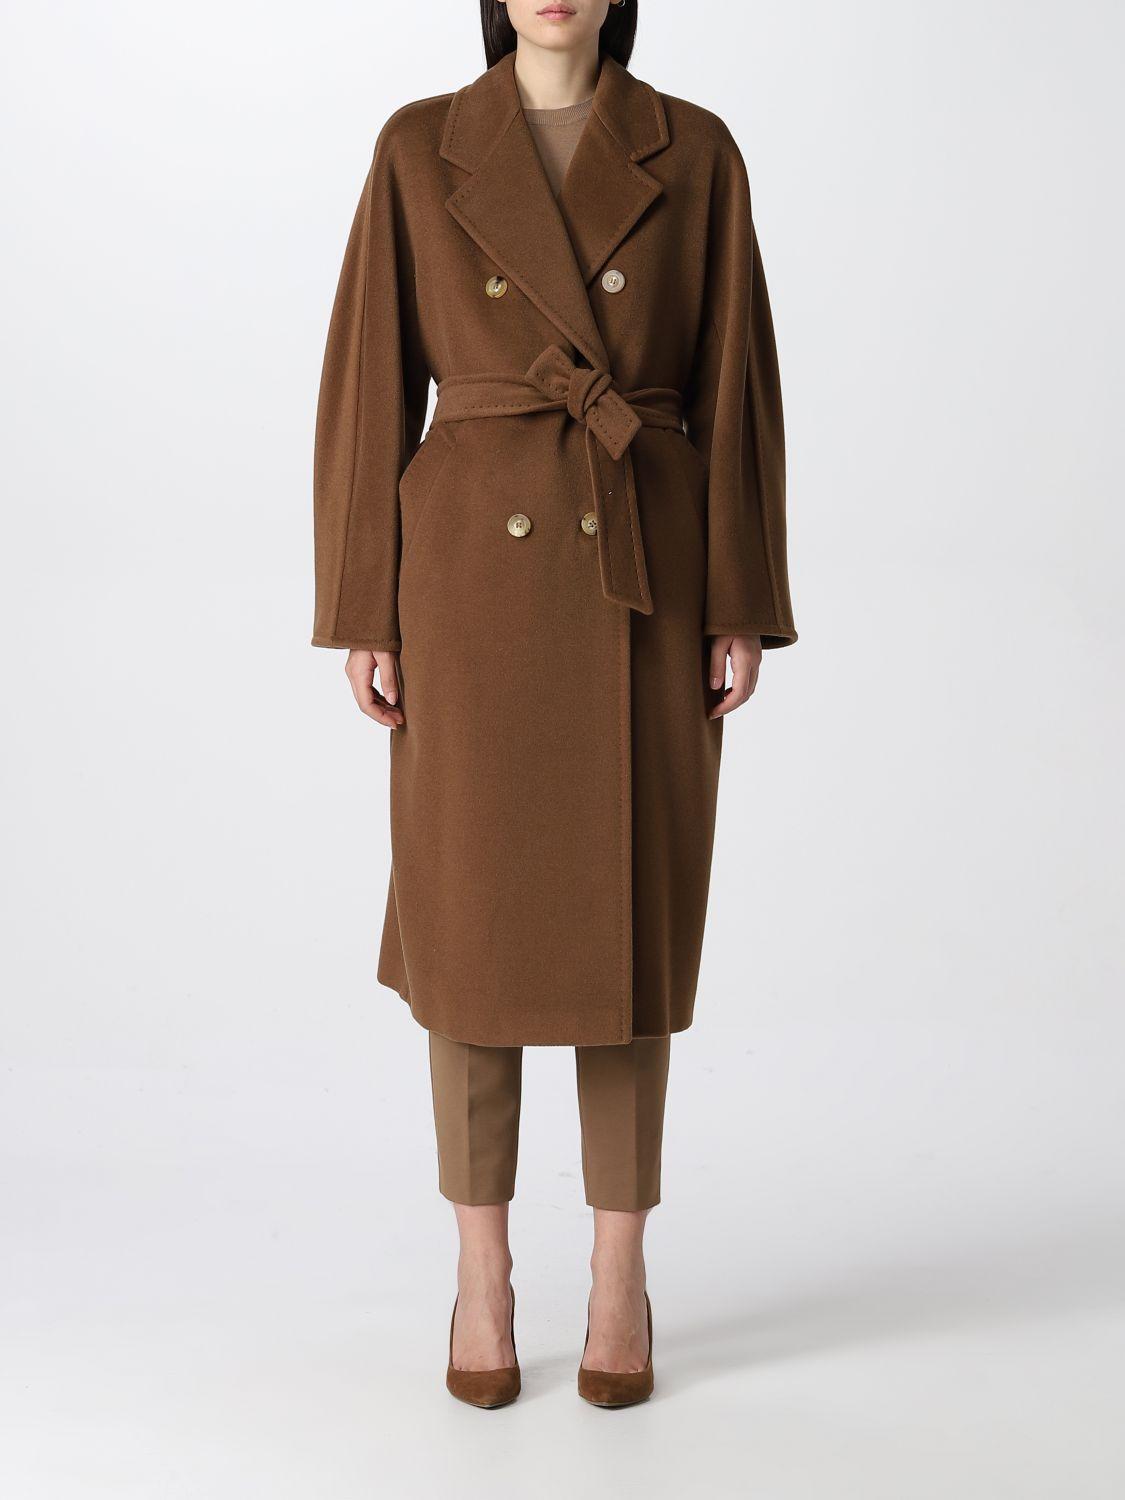 Max Mara Leather Coat in Leather (Brown) | Lyst